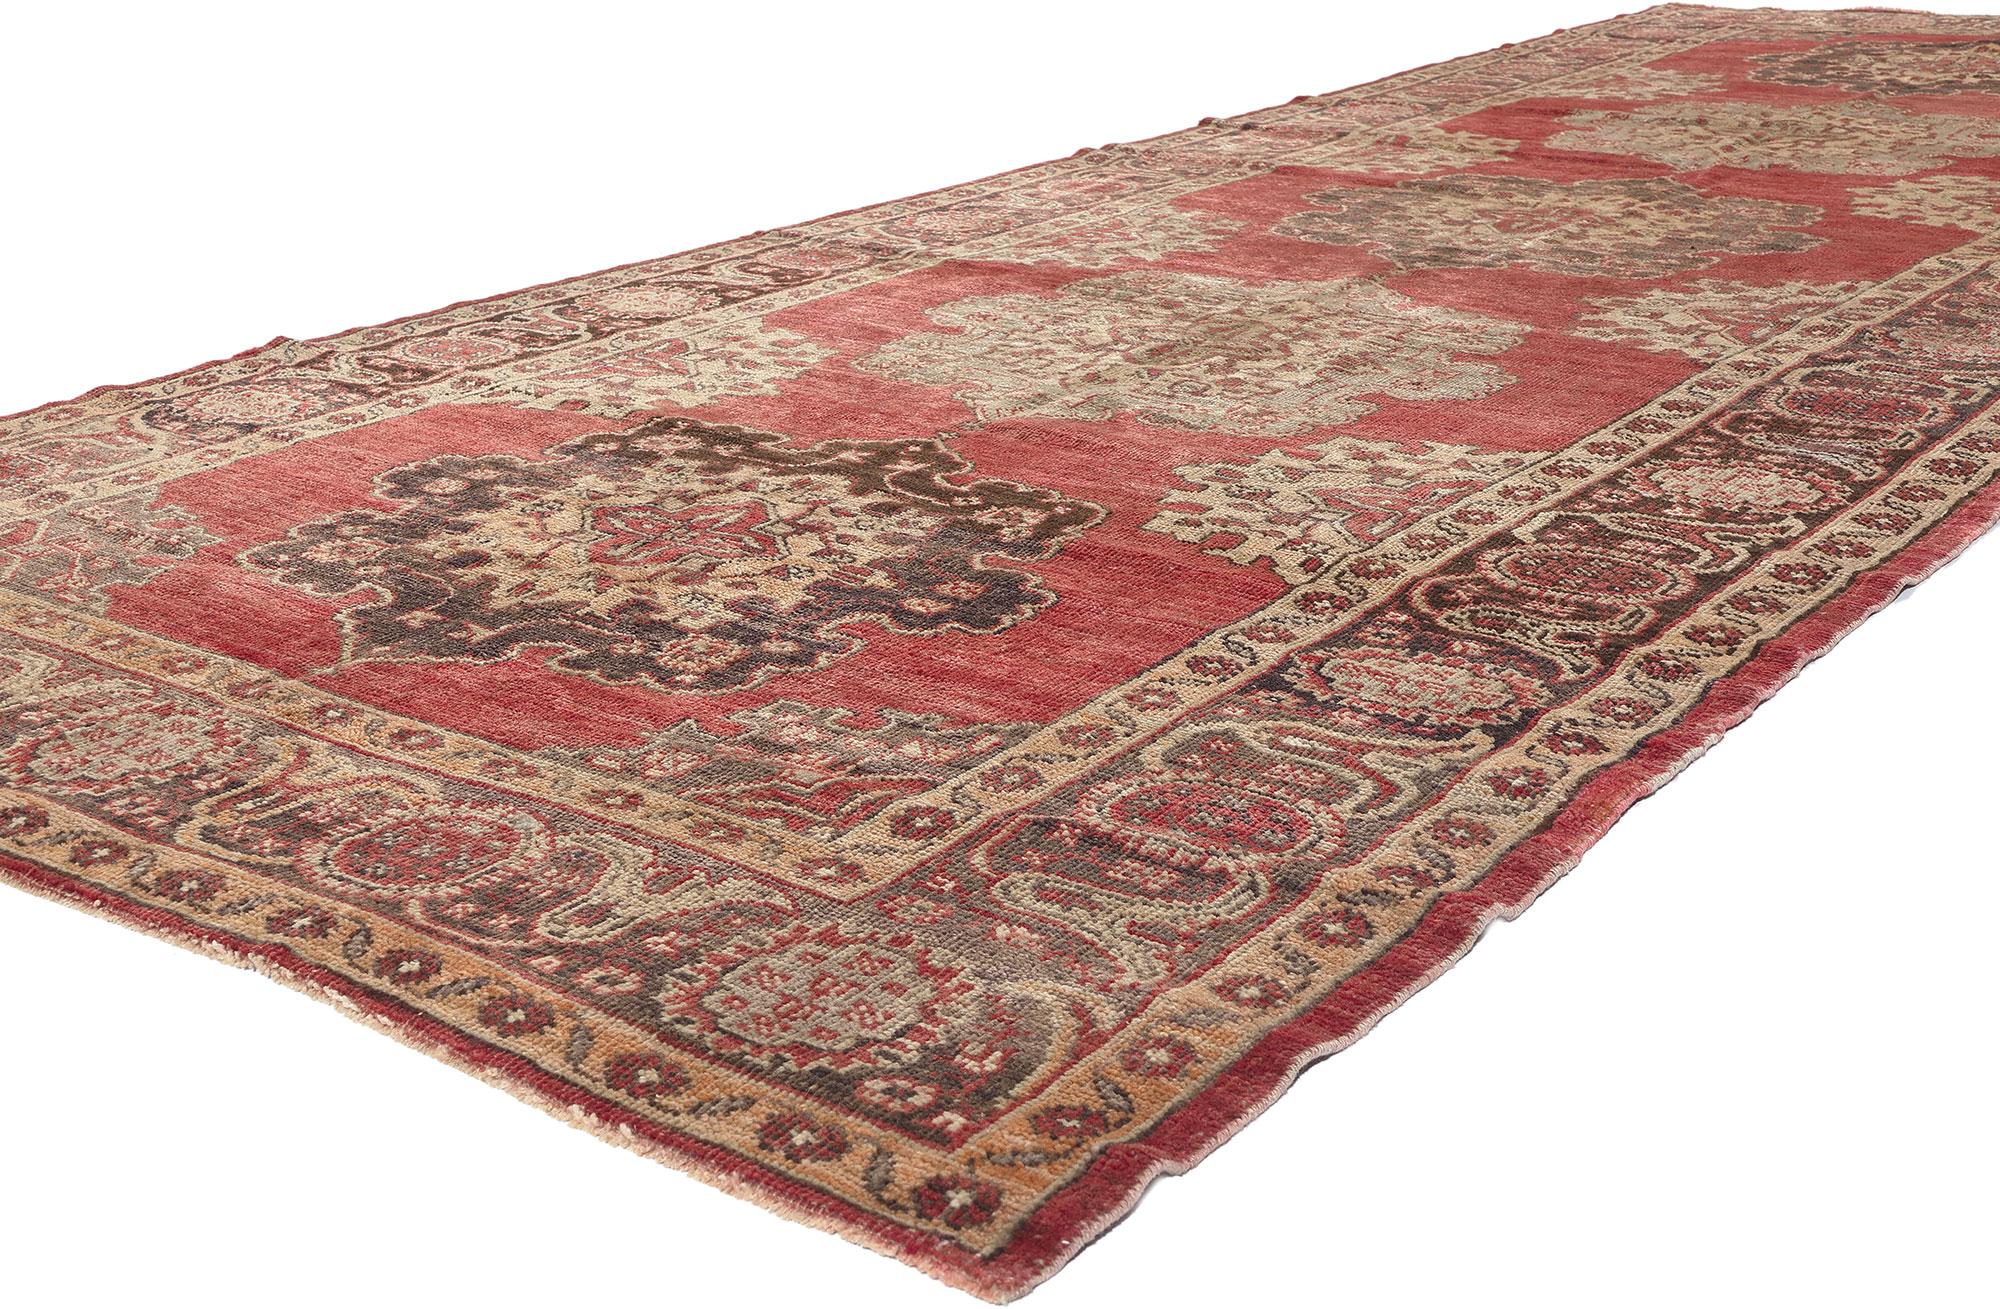 52363 Vintage Turkish Oushak Rug, 05’02 x 13’07. Experience the epitome of refined opulence with this meticulously hand-knotted vintage Turkish Oushak rug, a masterpiece in earth-tone elegance. Crafted from durable wool, its exquisite botanical